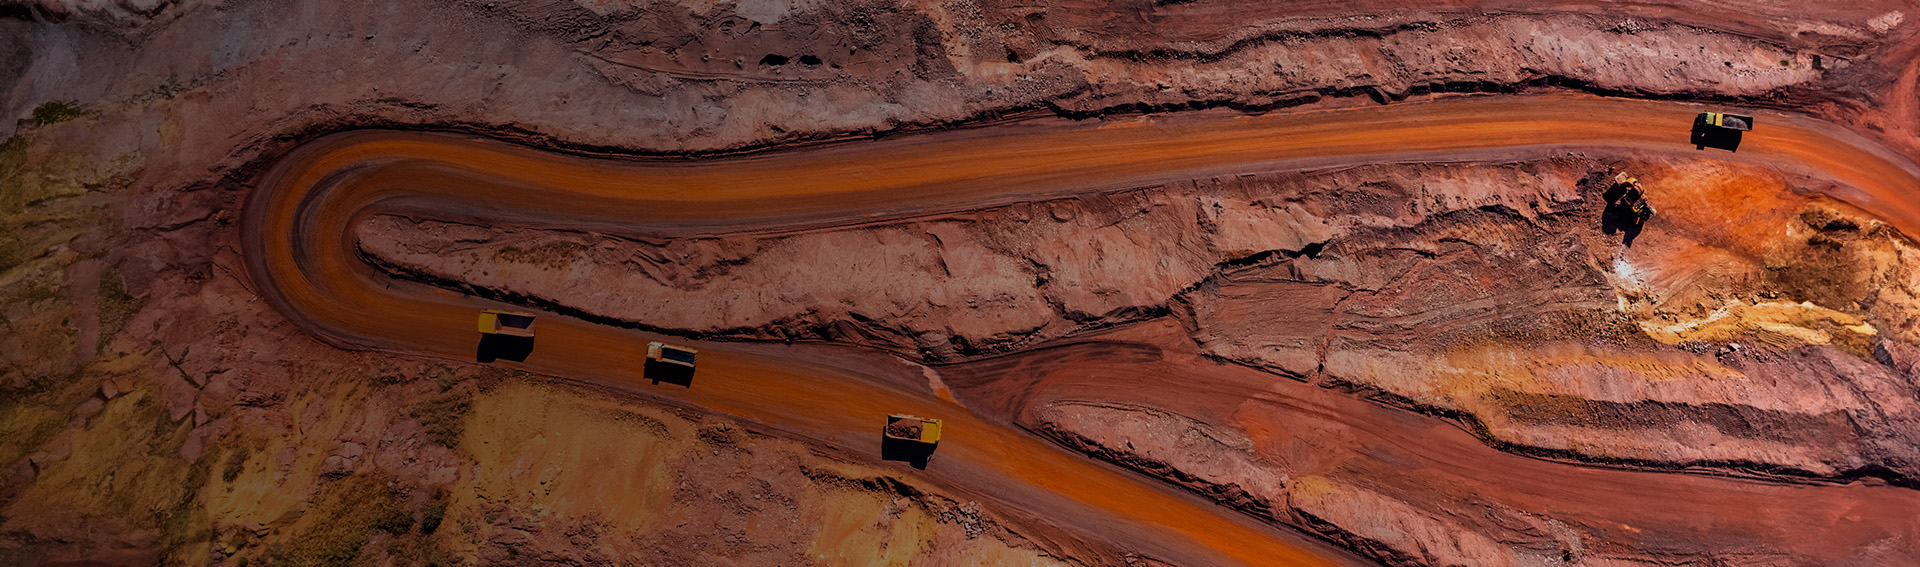 Commodity Watch: Gold, Copper and Iron Ore